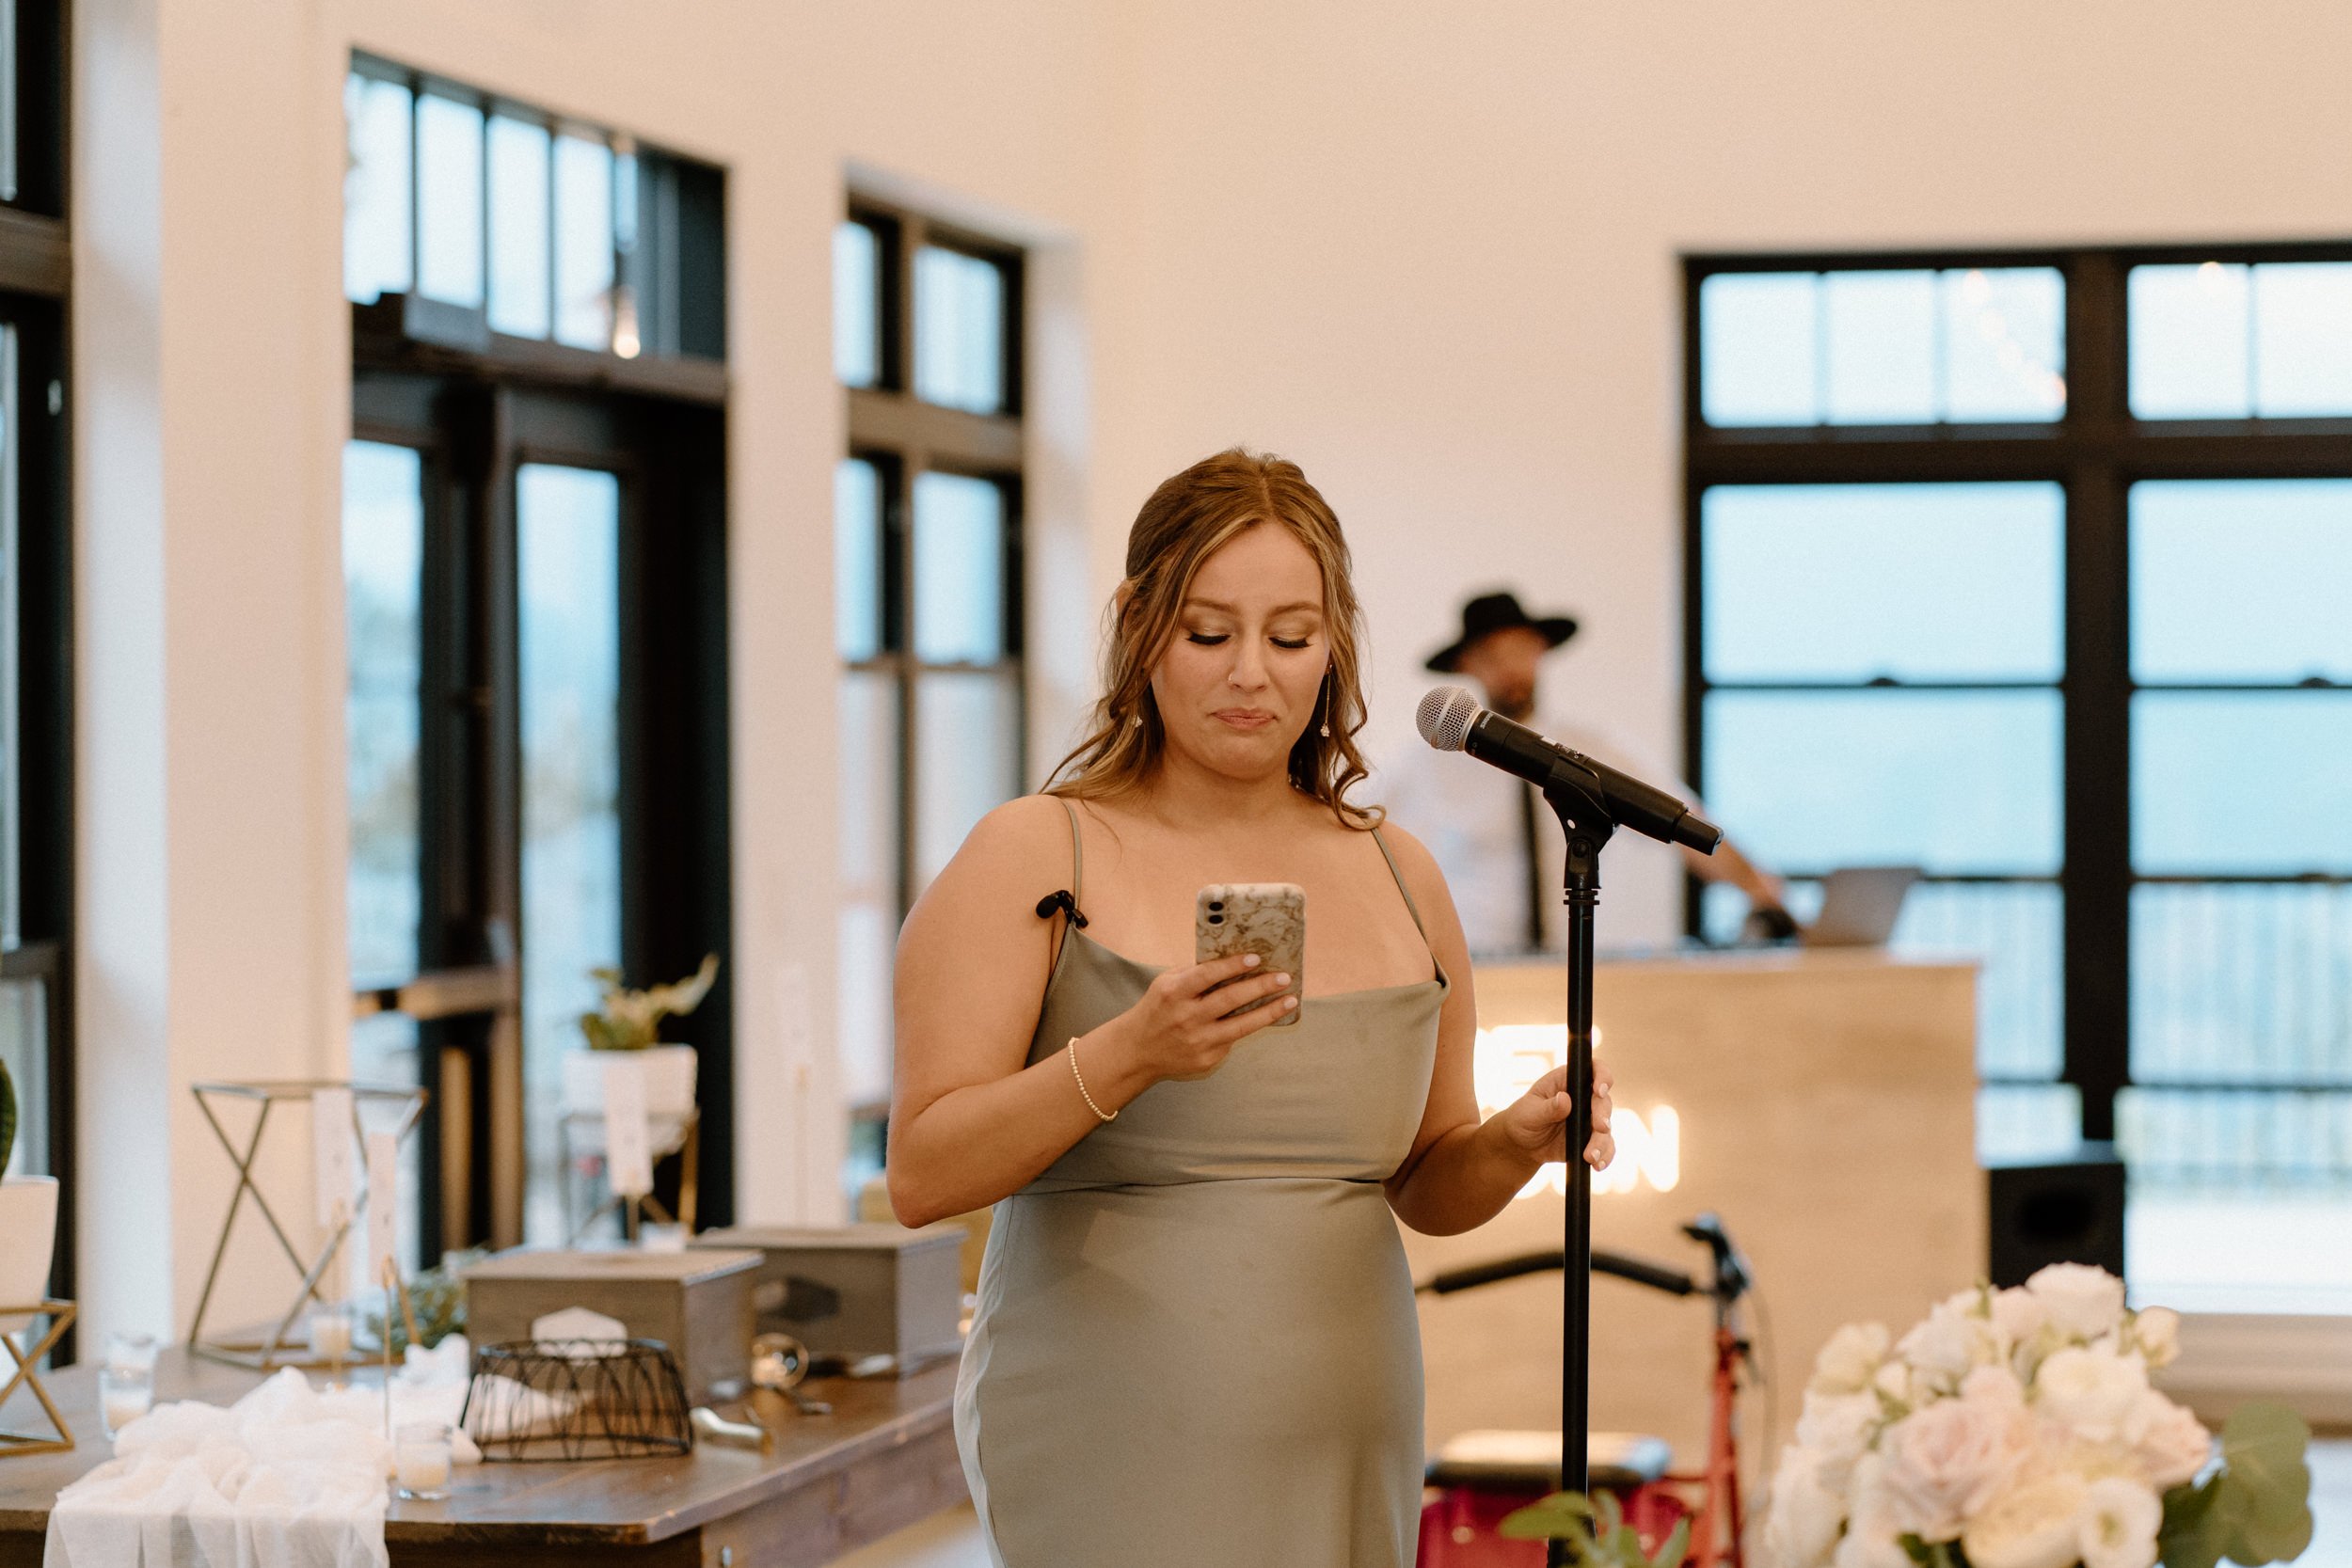 The maid of honor gives a toast to the couple